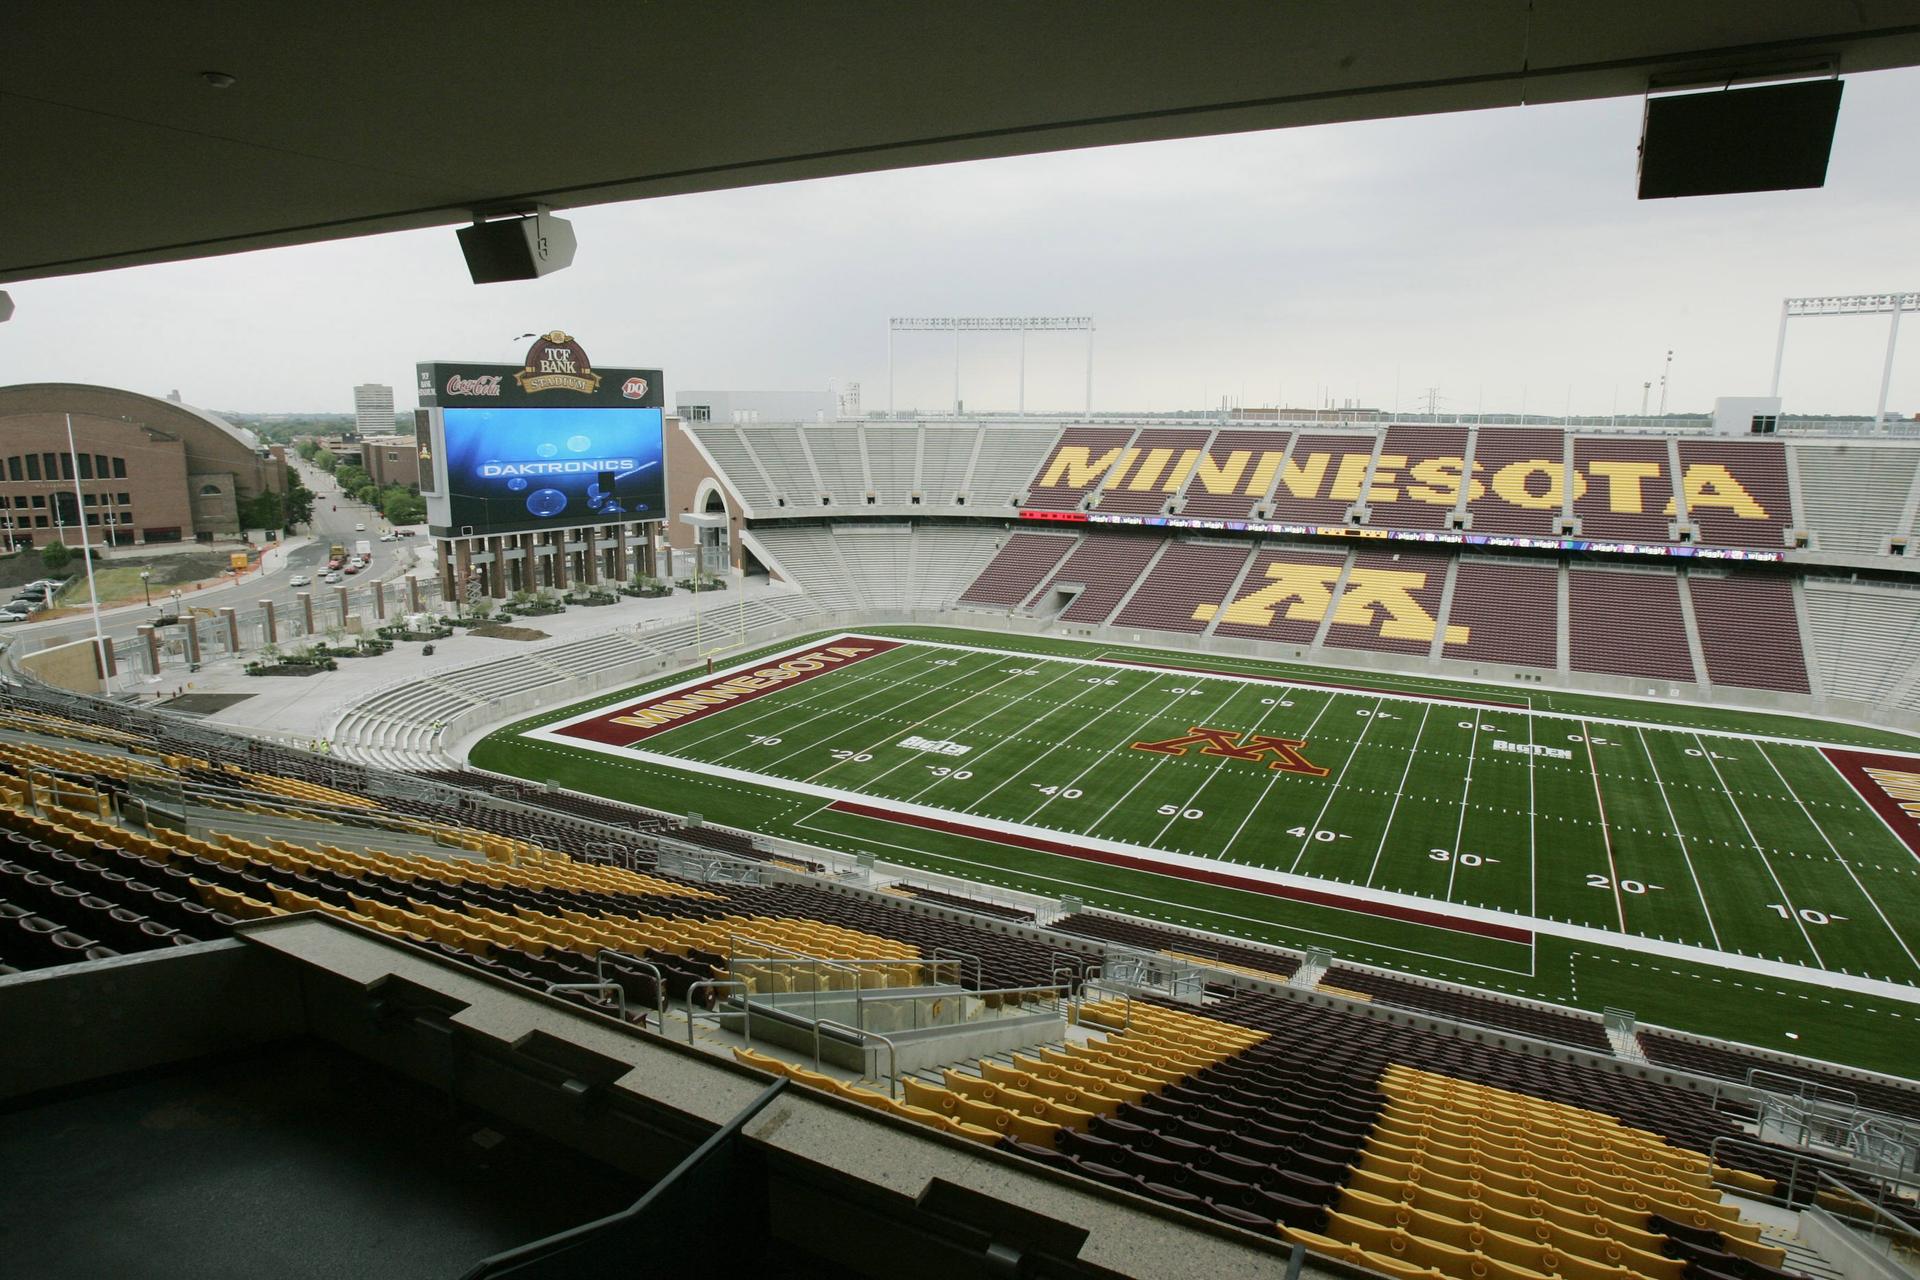 Best Player Props for Colorado vs. Minnesota – Touchdown Bets, Odds for Saturday